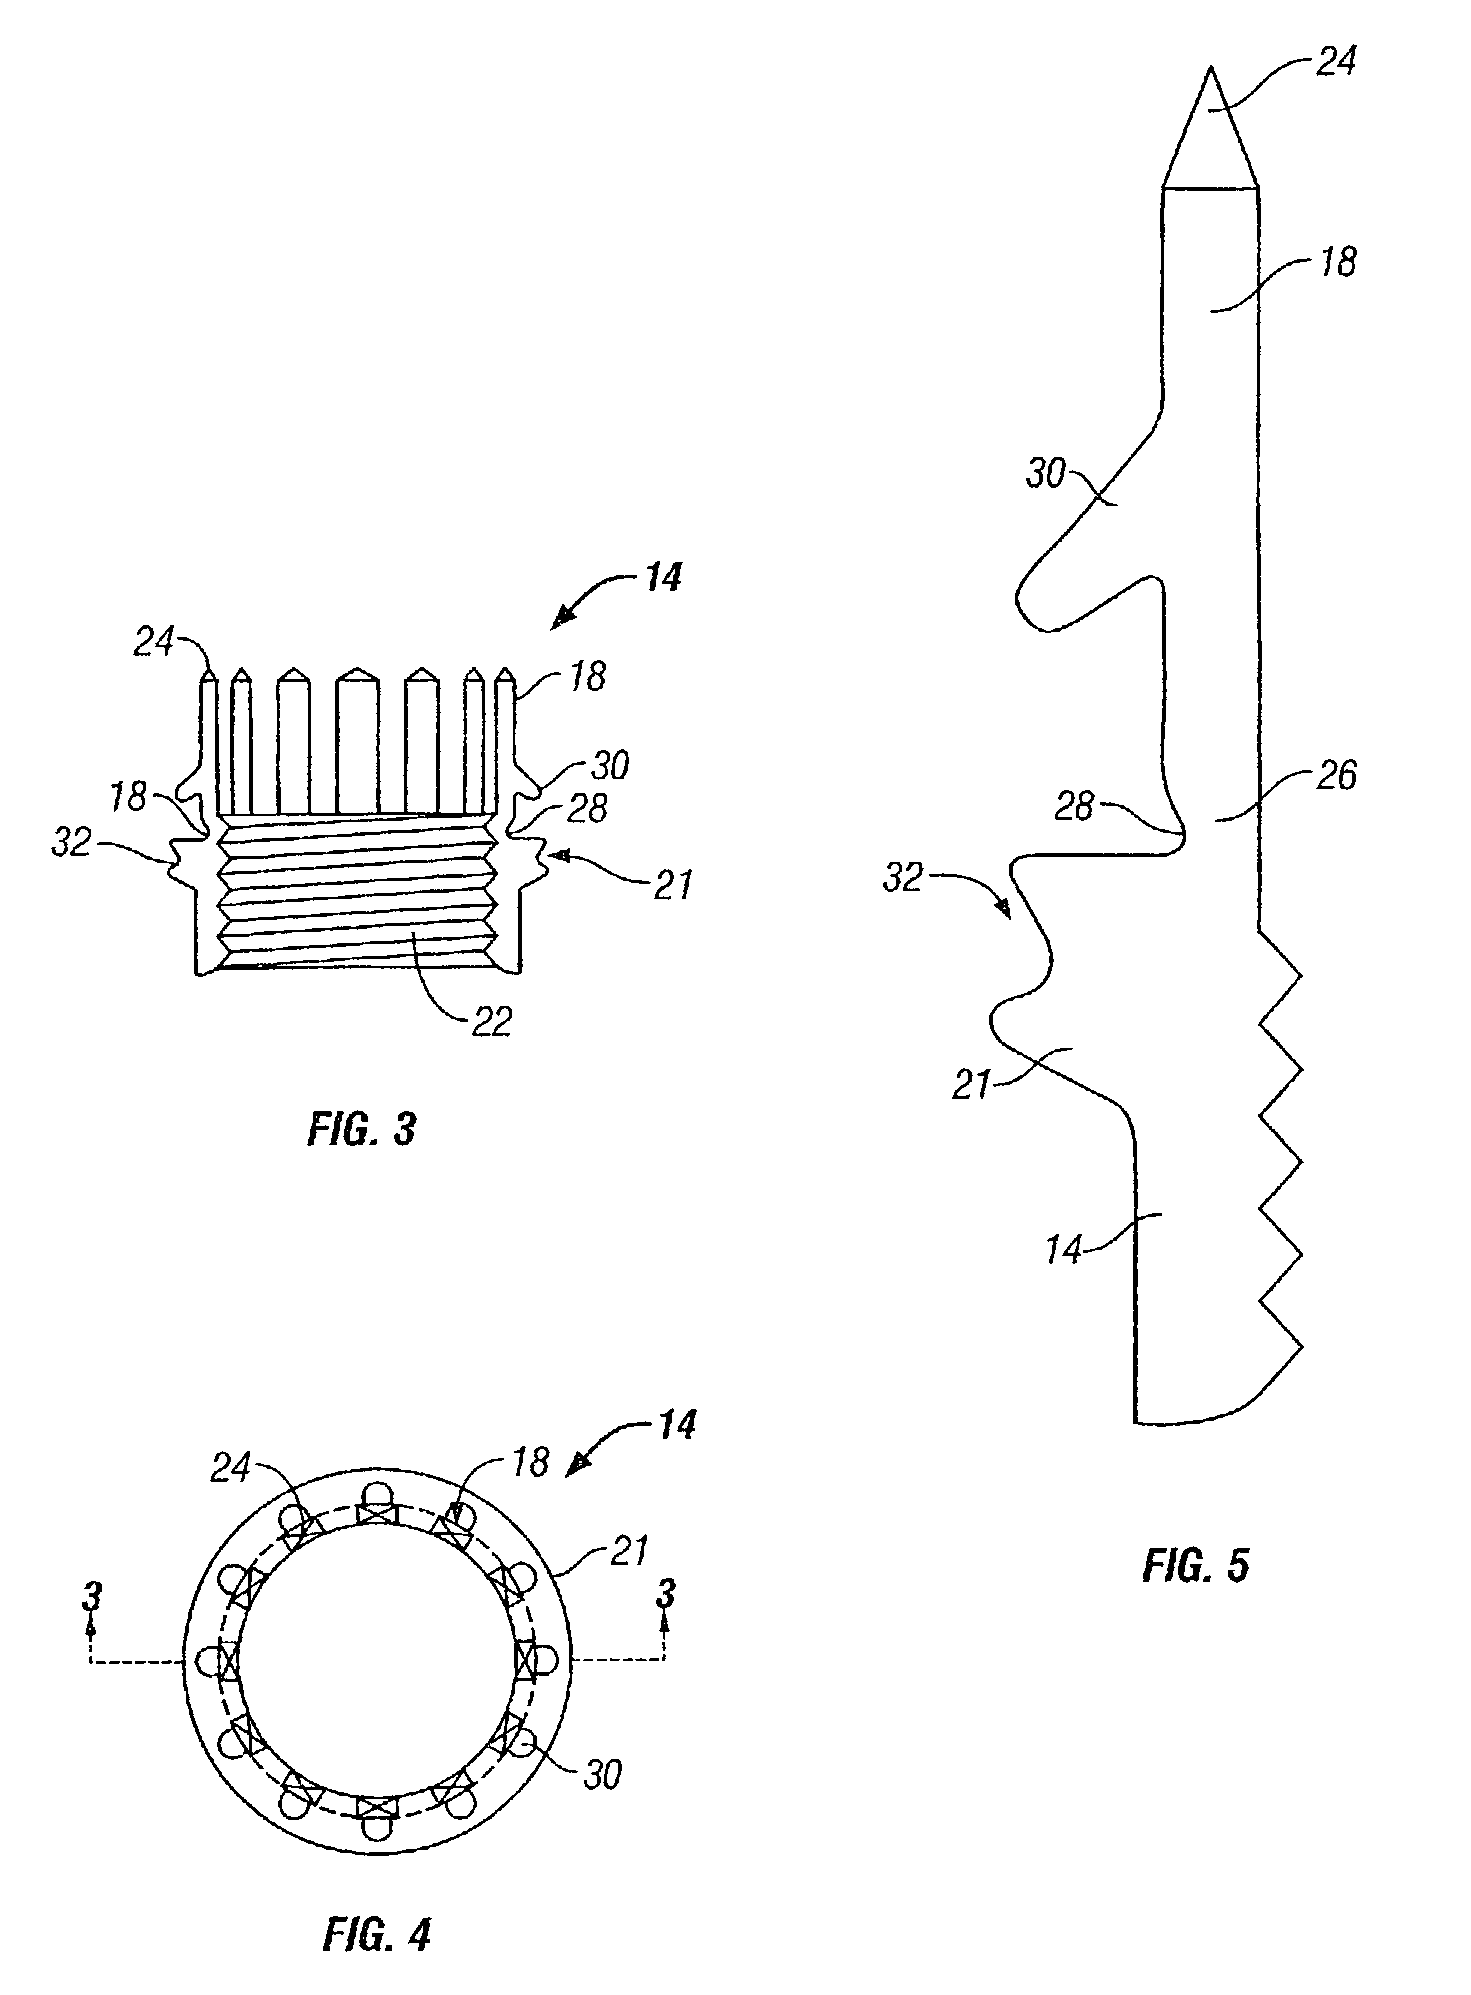 Perorally insertable/removable anti-reflux valve